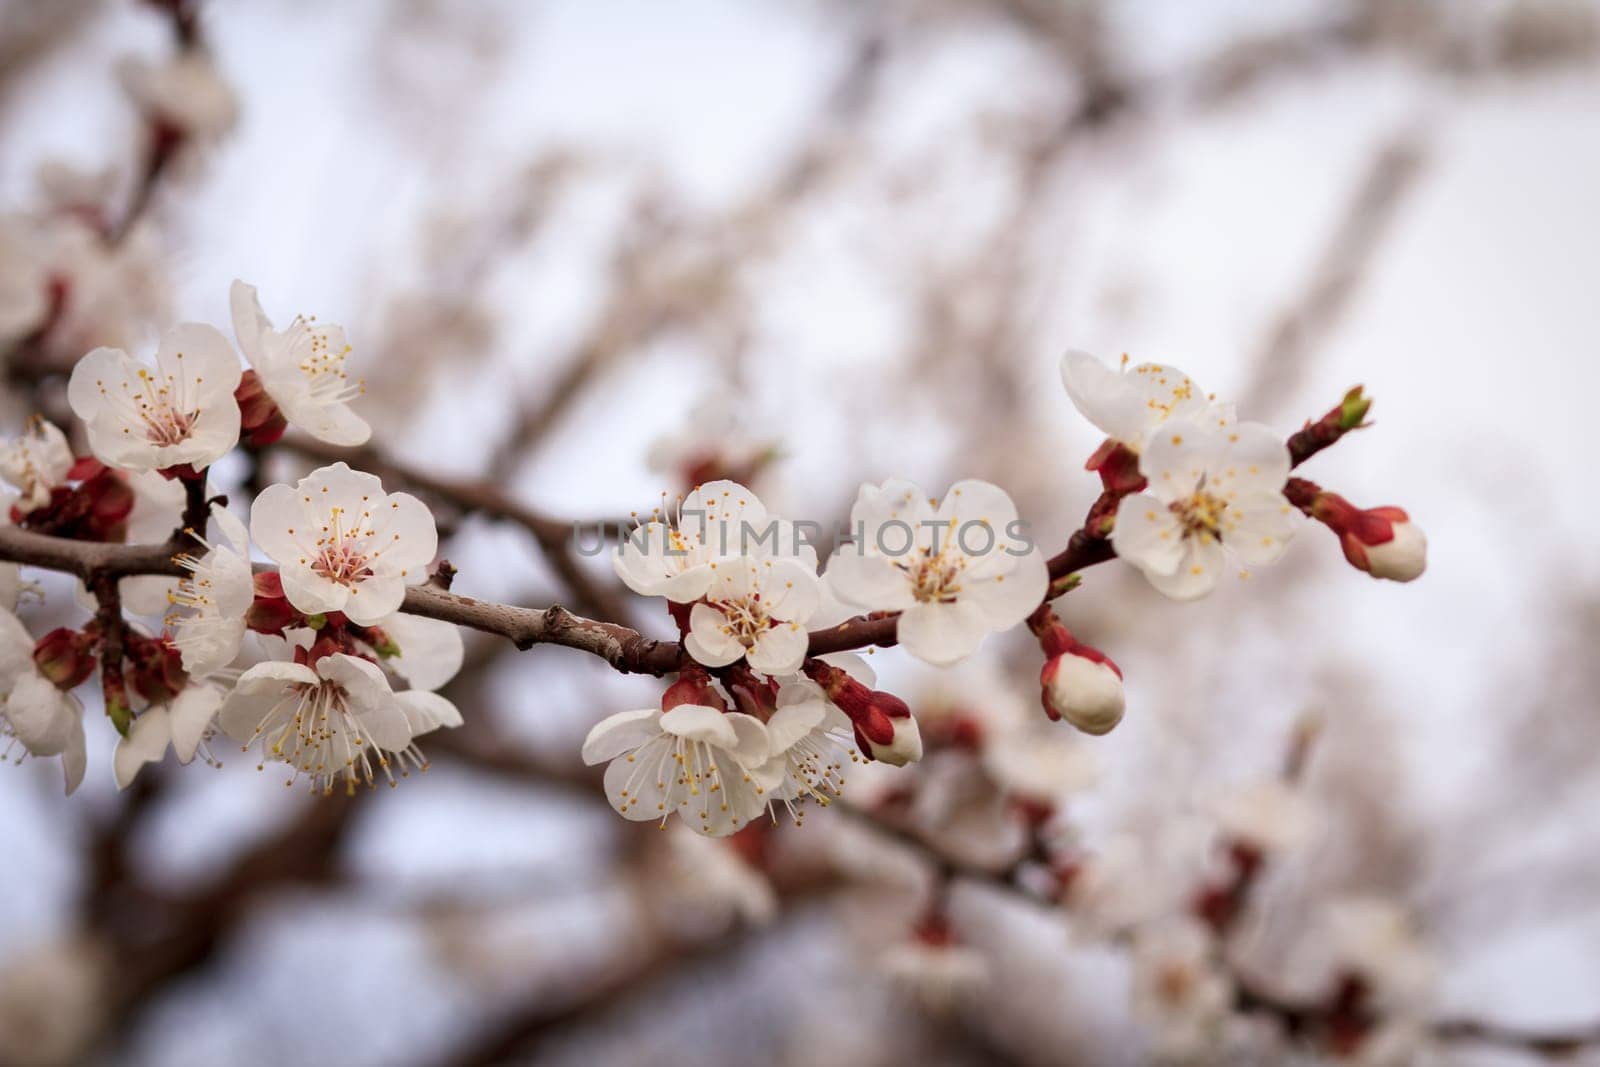 Branch of apricot tree in the period of spring flowering on blurred sky background. Shallow depth of field. Selective focus on flowers.